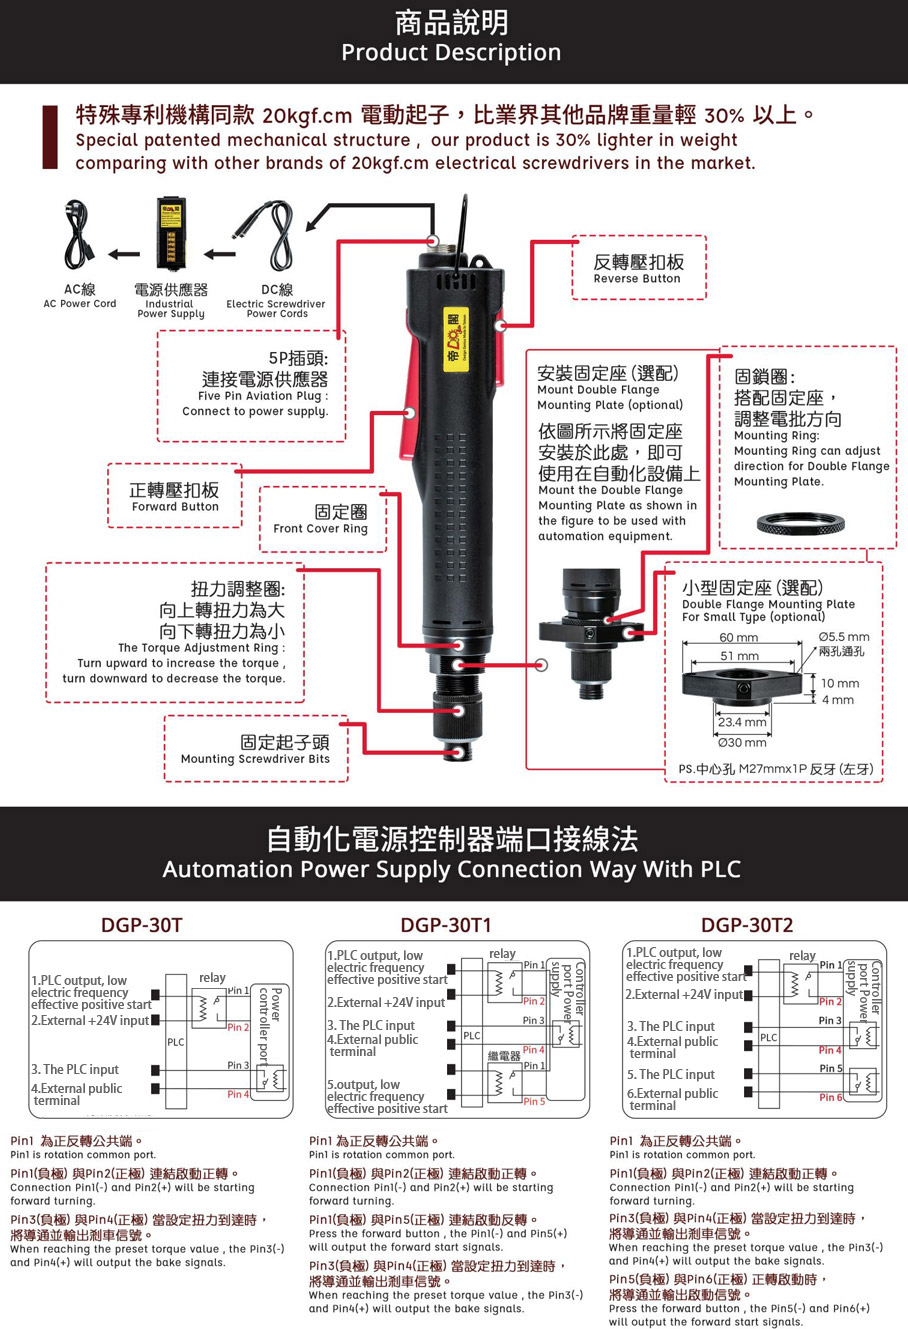 Medium-sized industrial automation brushless electric screwdriver 